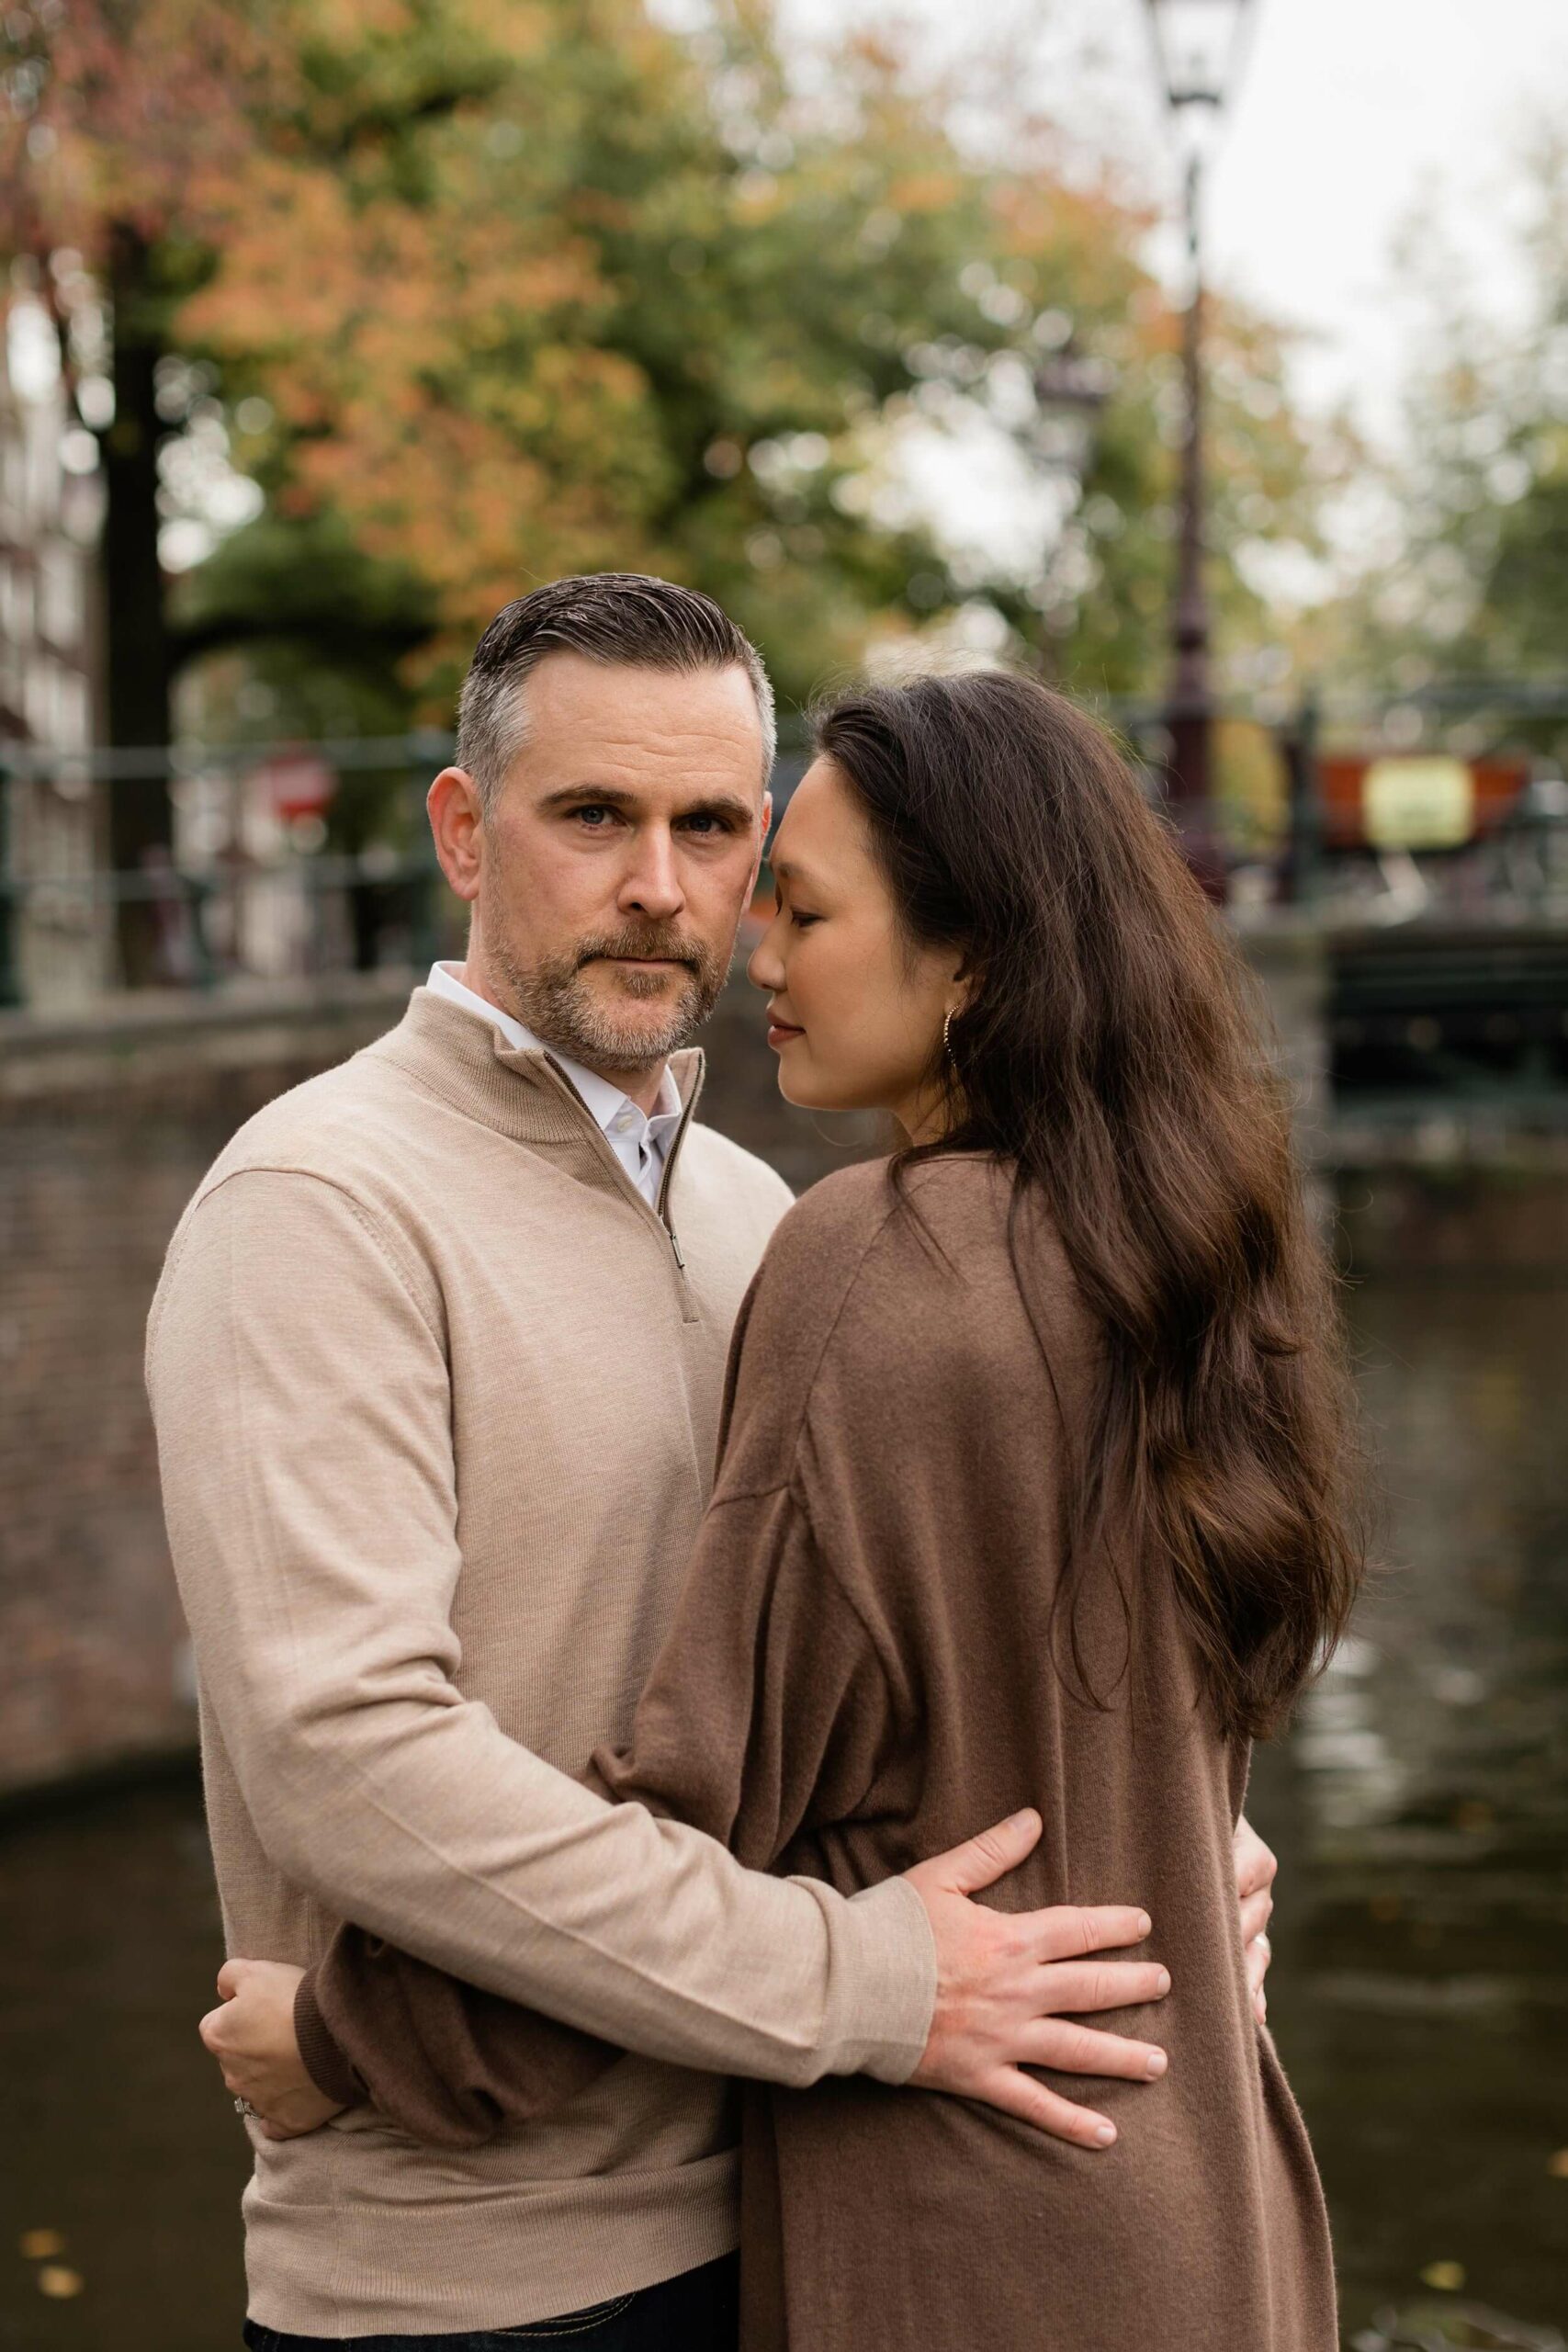 alt="romantic city photography session in Amsterdam"